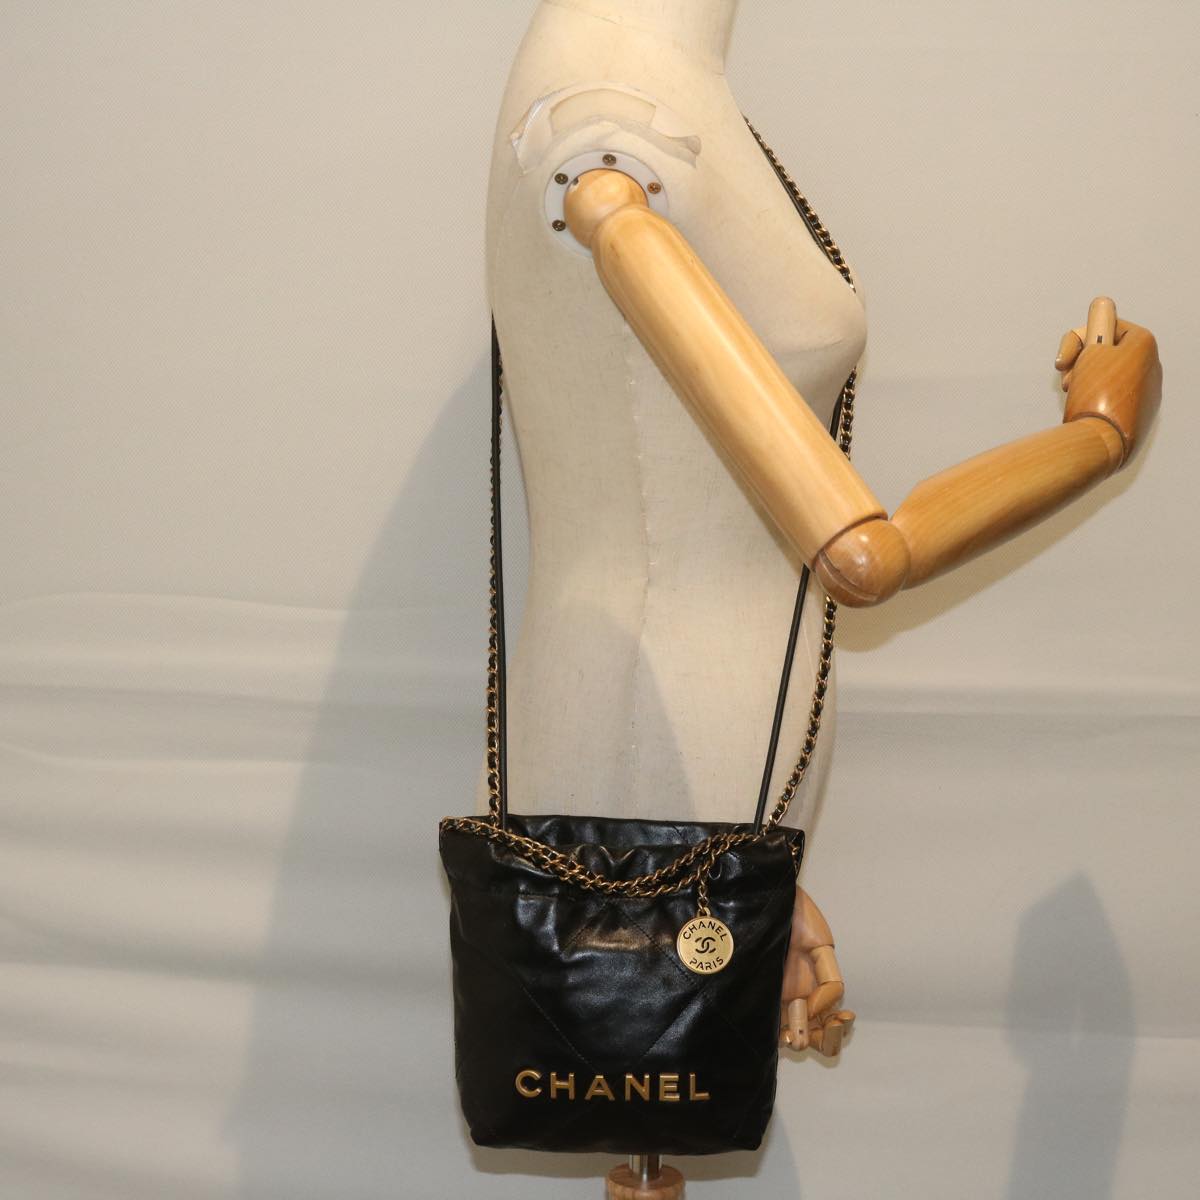 CHANEL CHANEL 22 Chain Hand Bag Leather Black AS3980 CC Auth 59889S